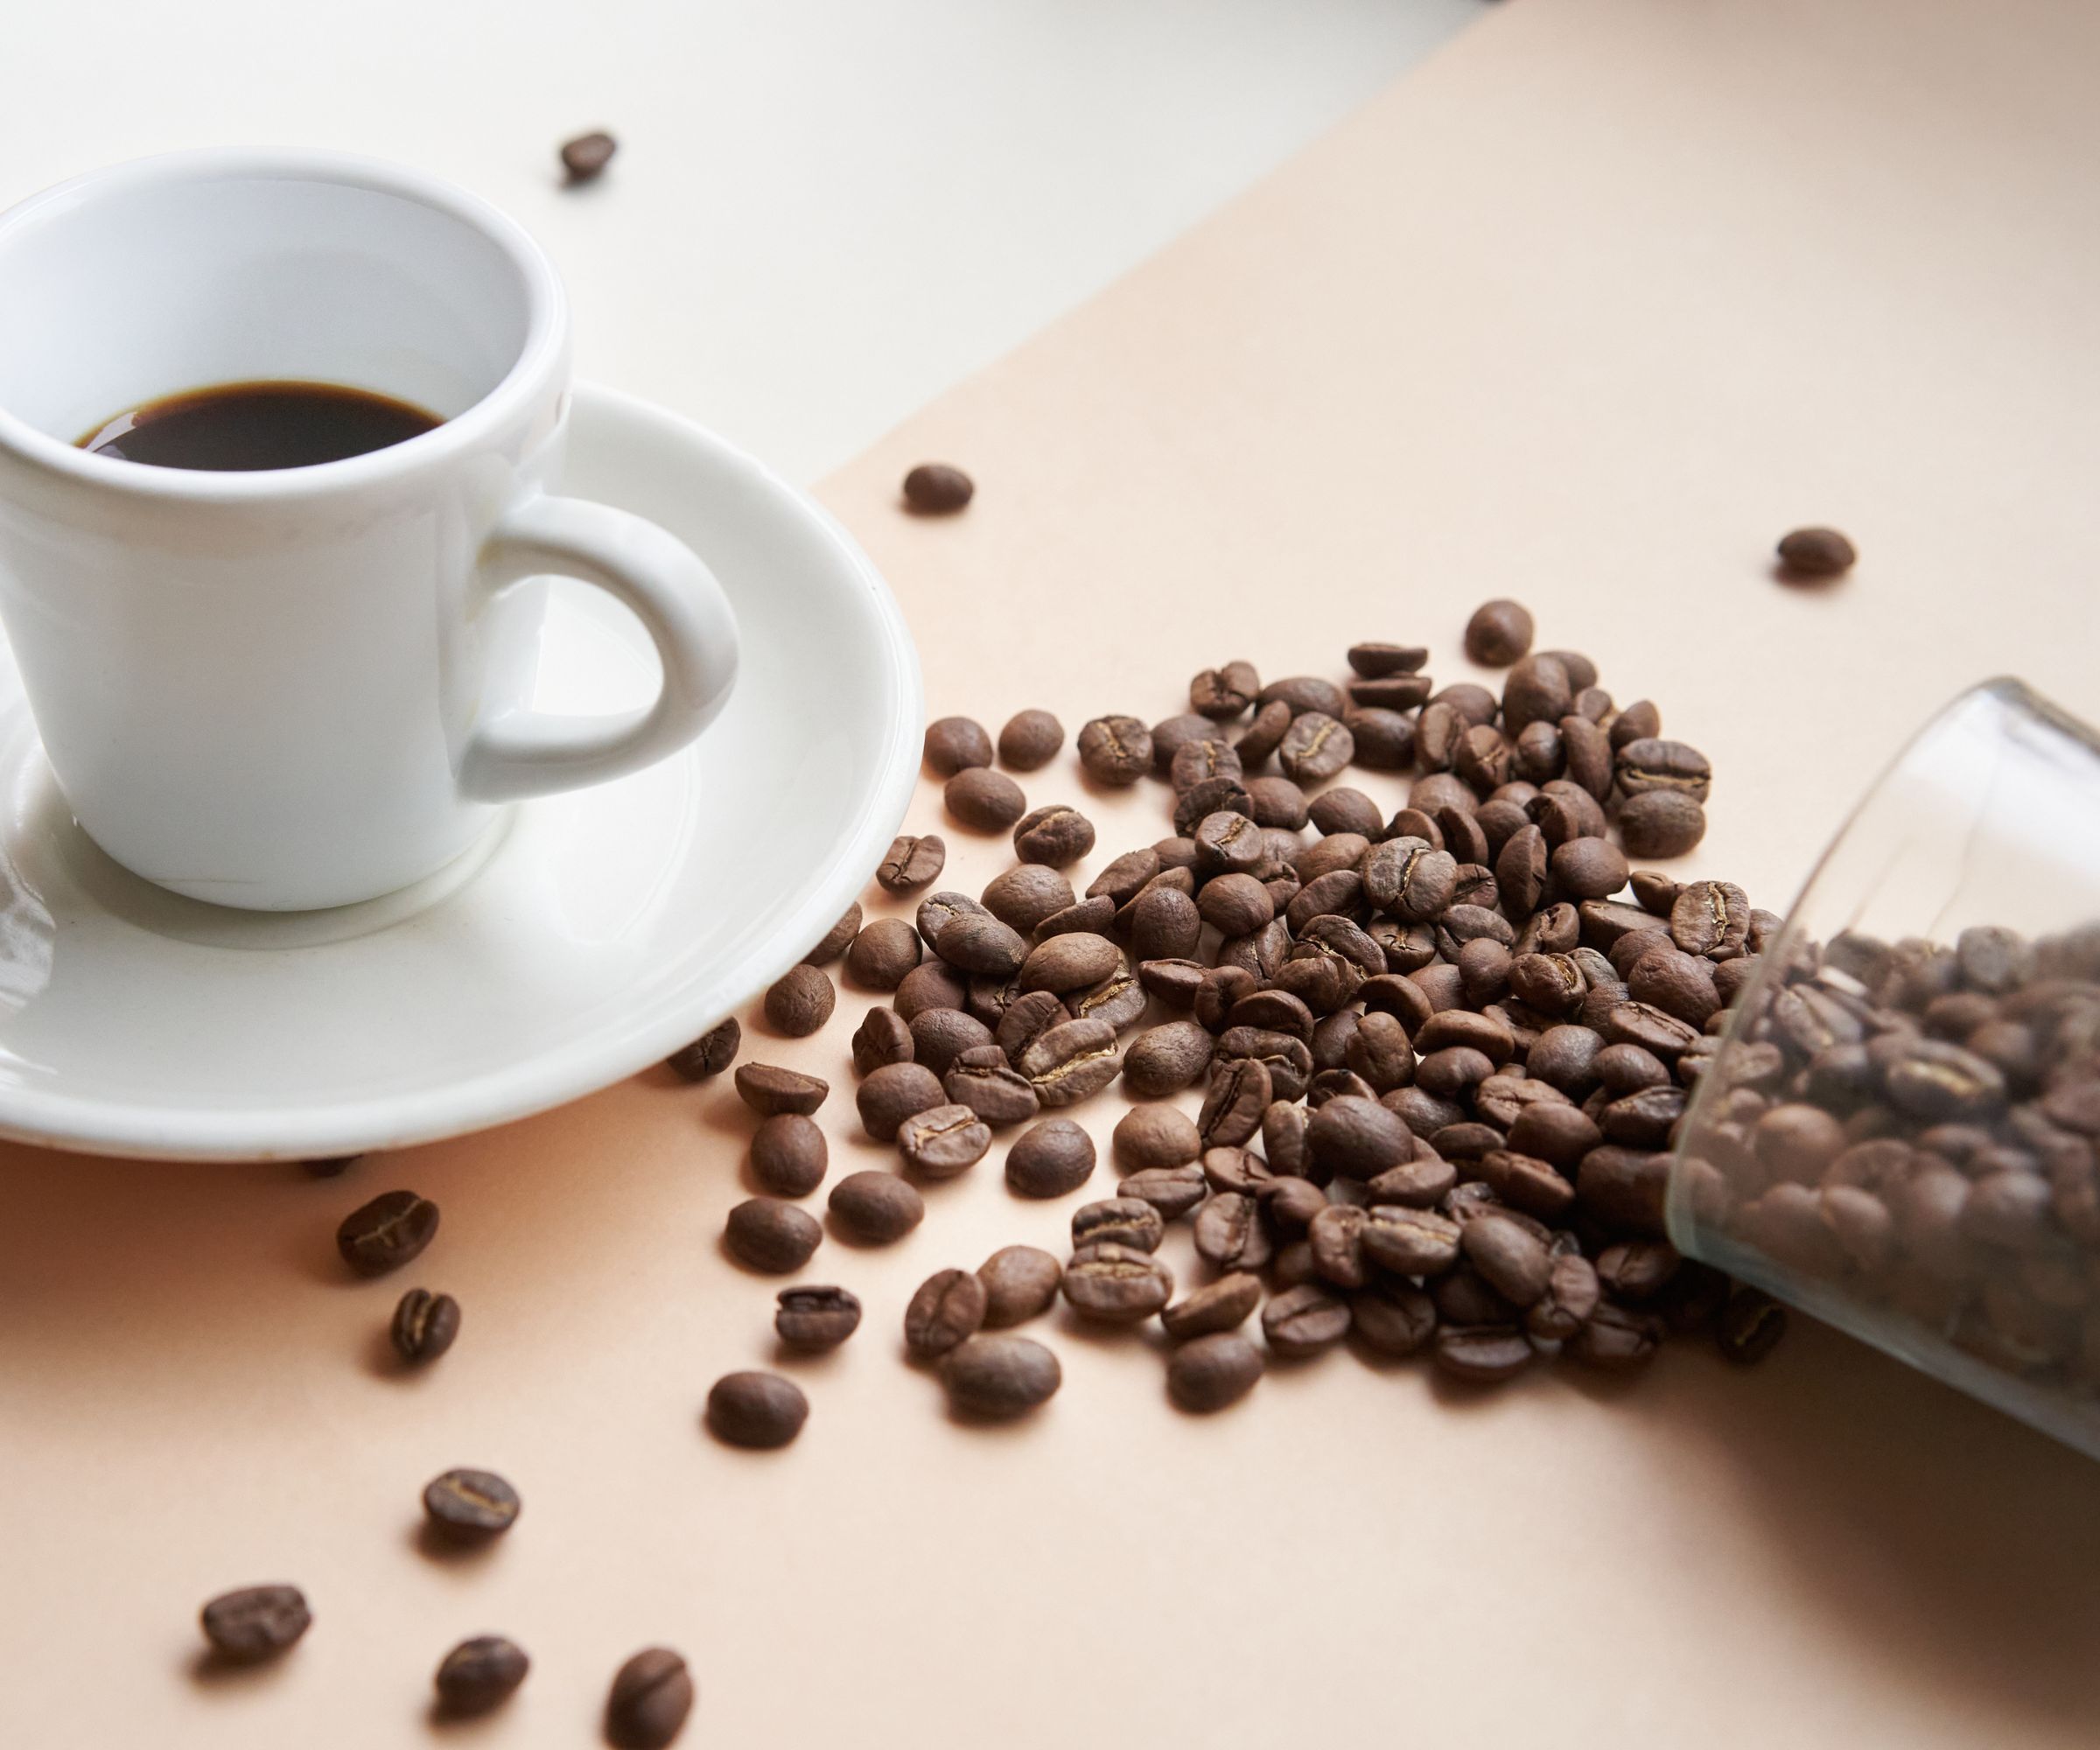 A cup of coffee with beans spilled on the table